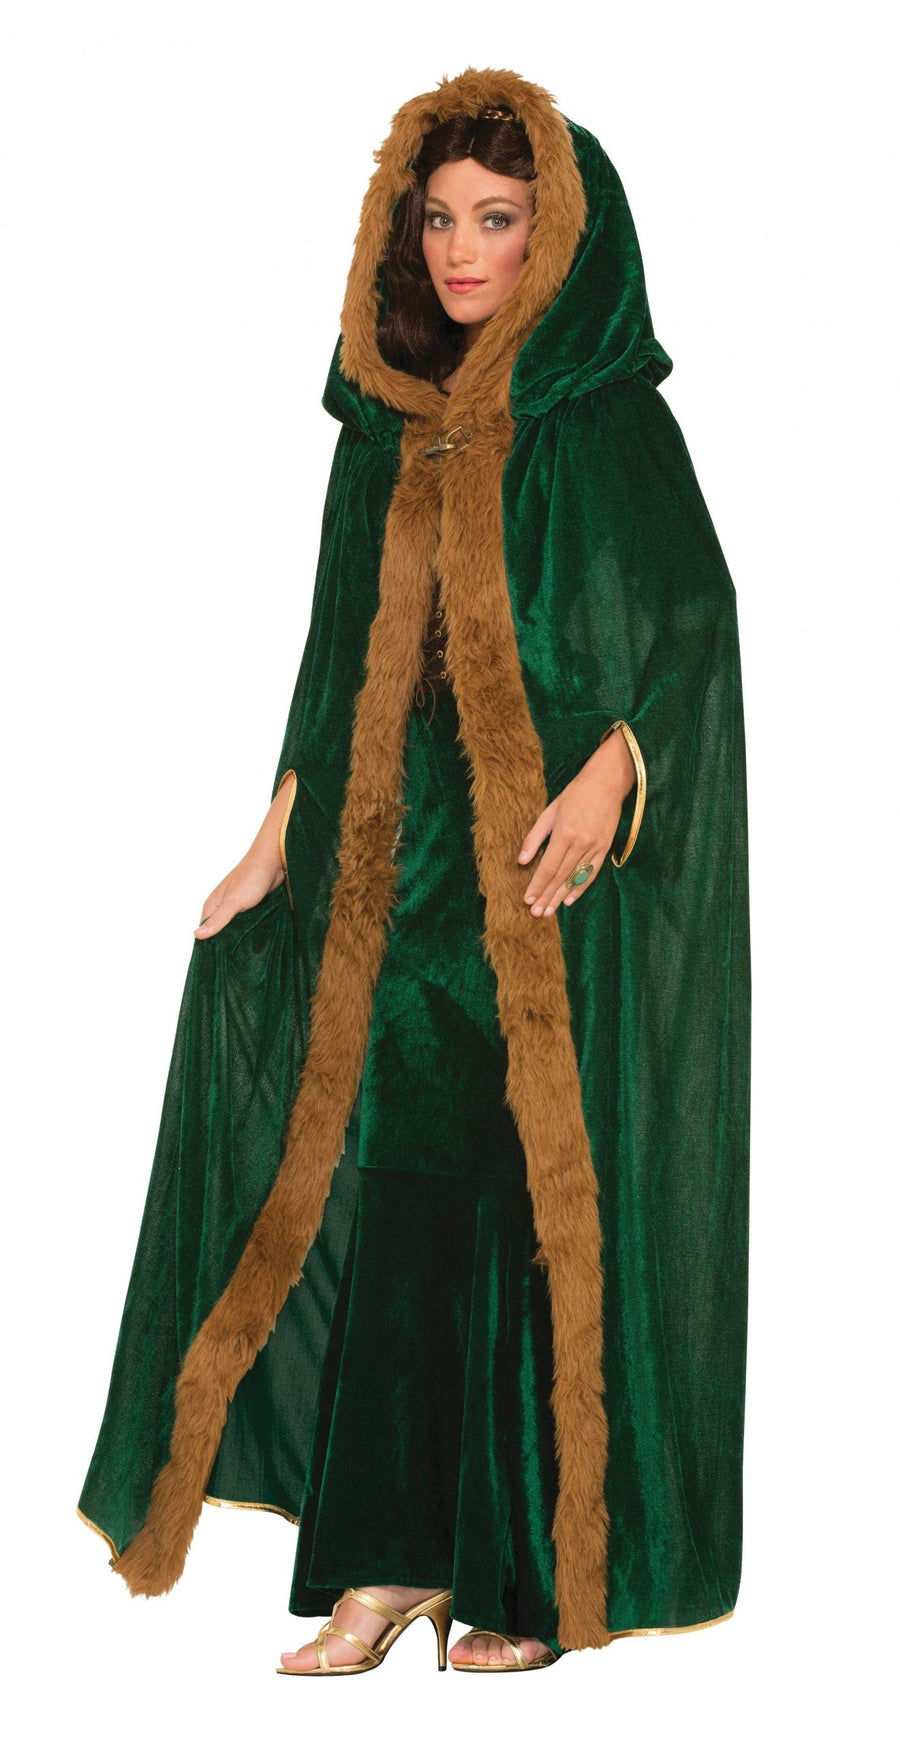 Womens Faux Fur Trimmed Cape Green Female Adult Costume Halloween_1